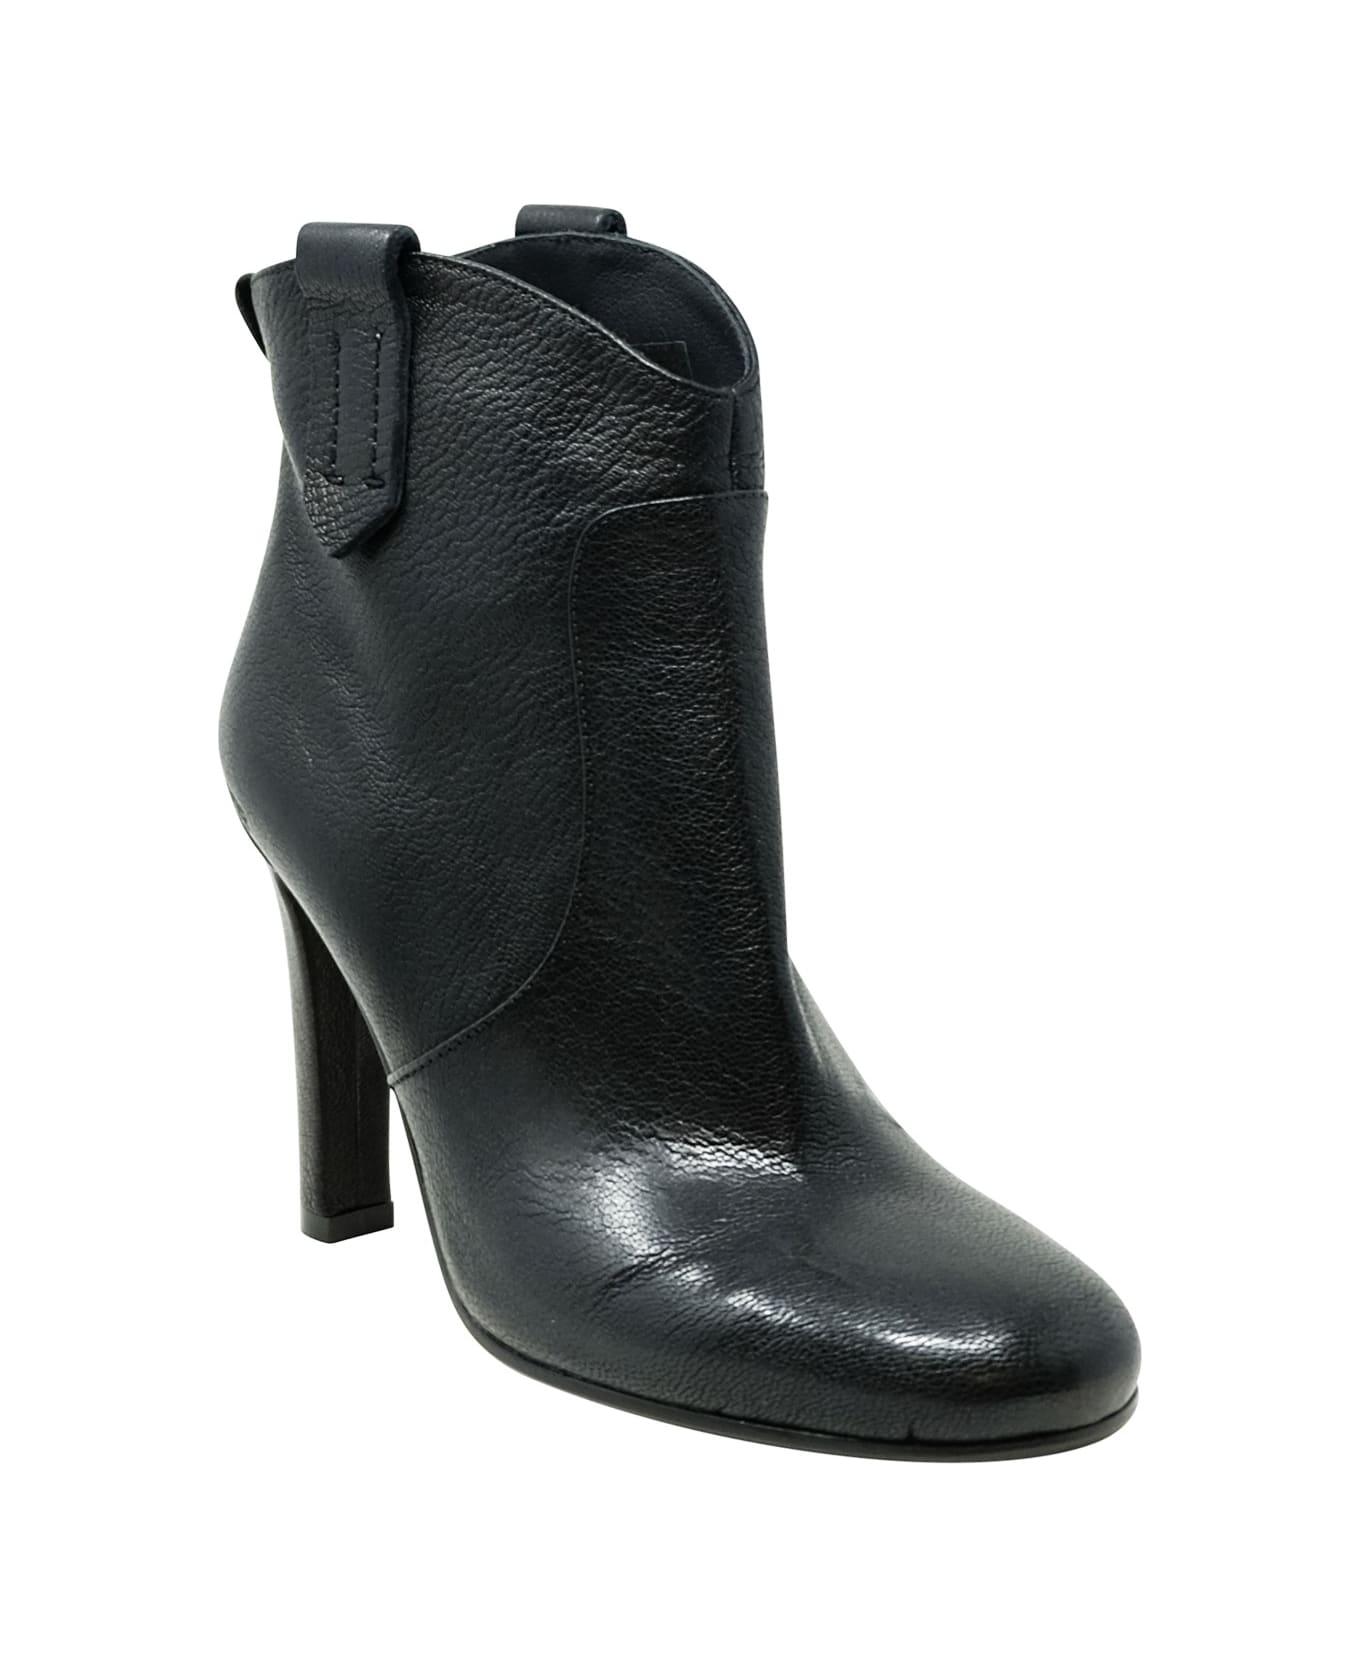 Golden Goose Kelsey Black Leather Ankle Boots ブーツ